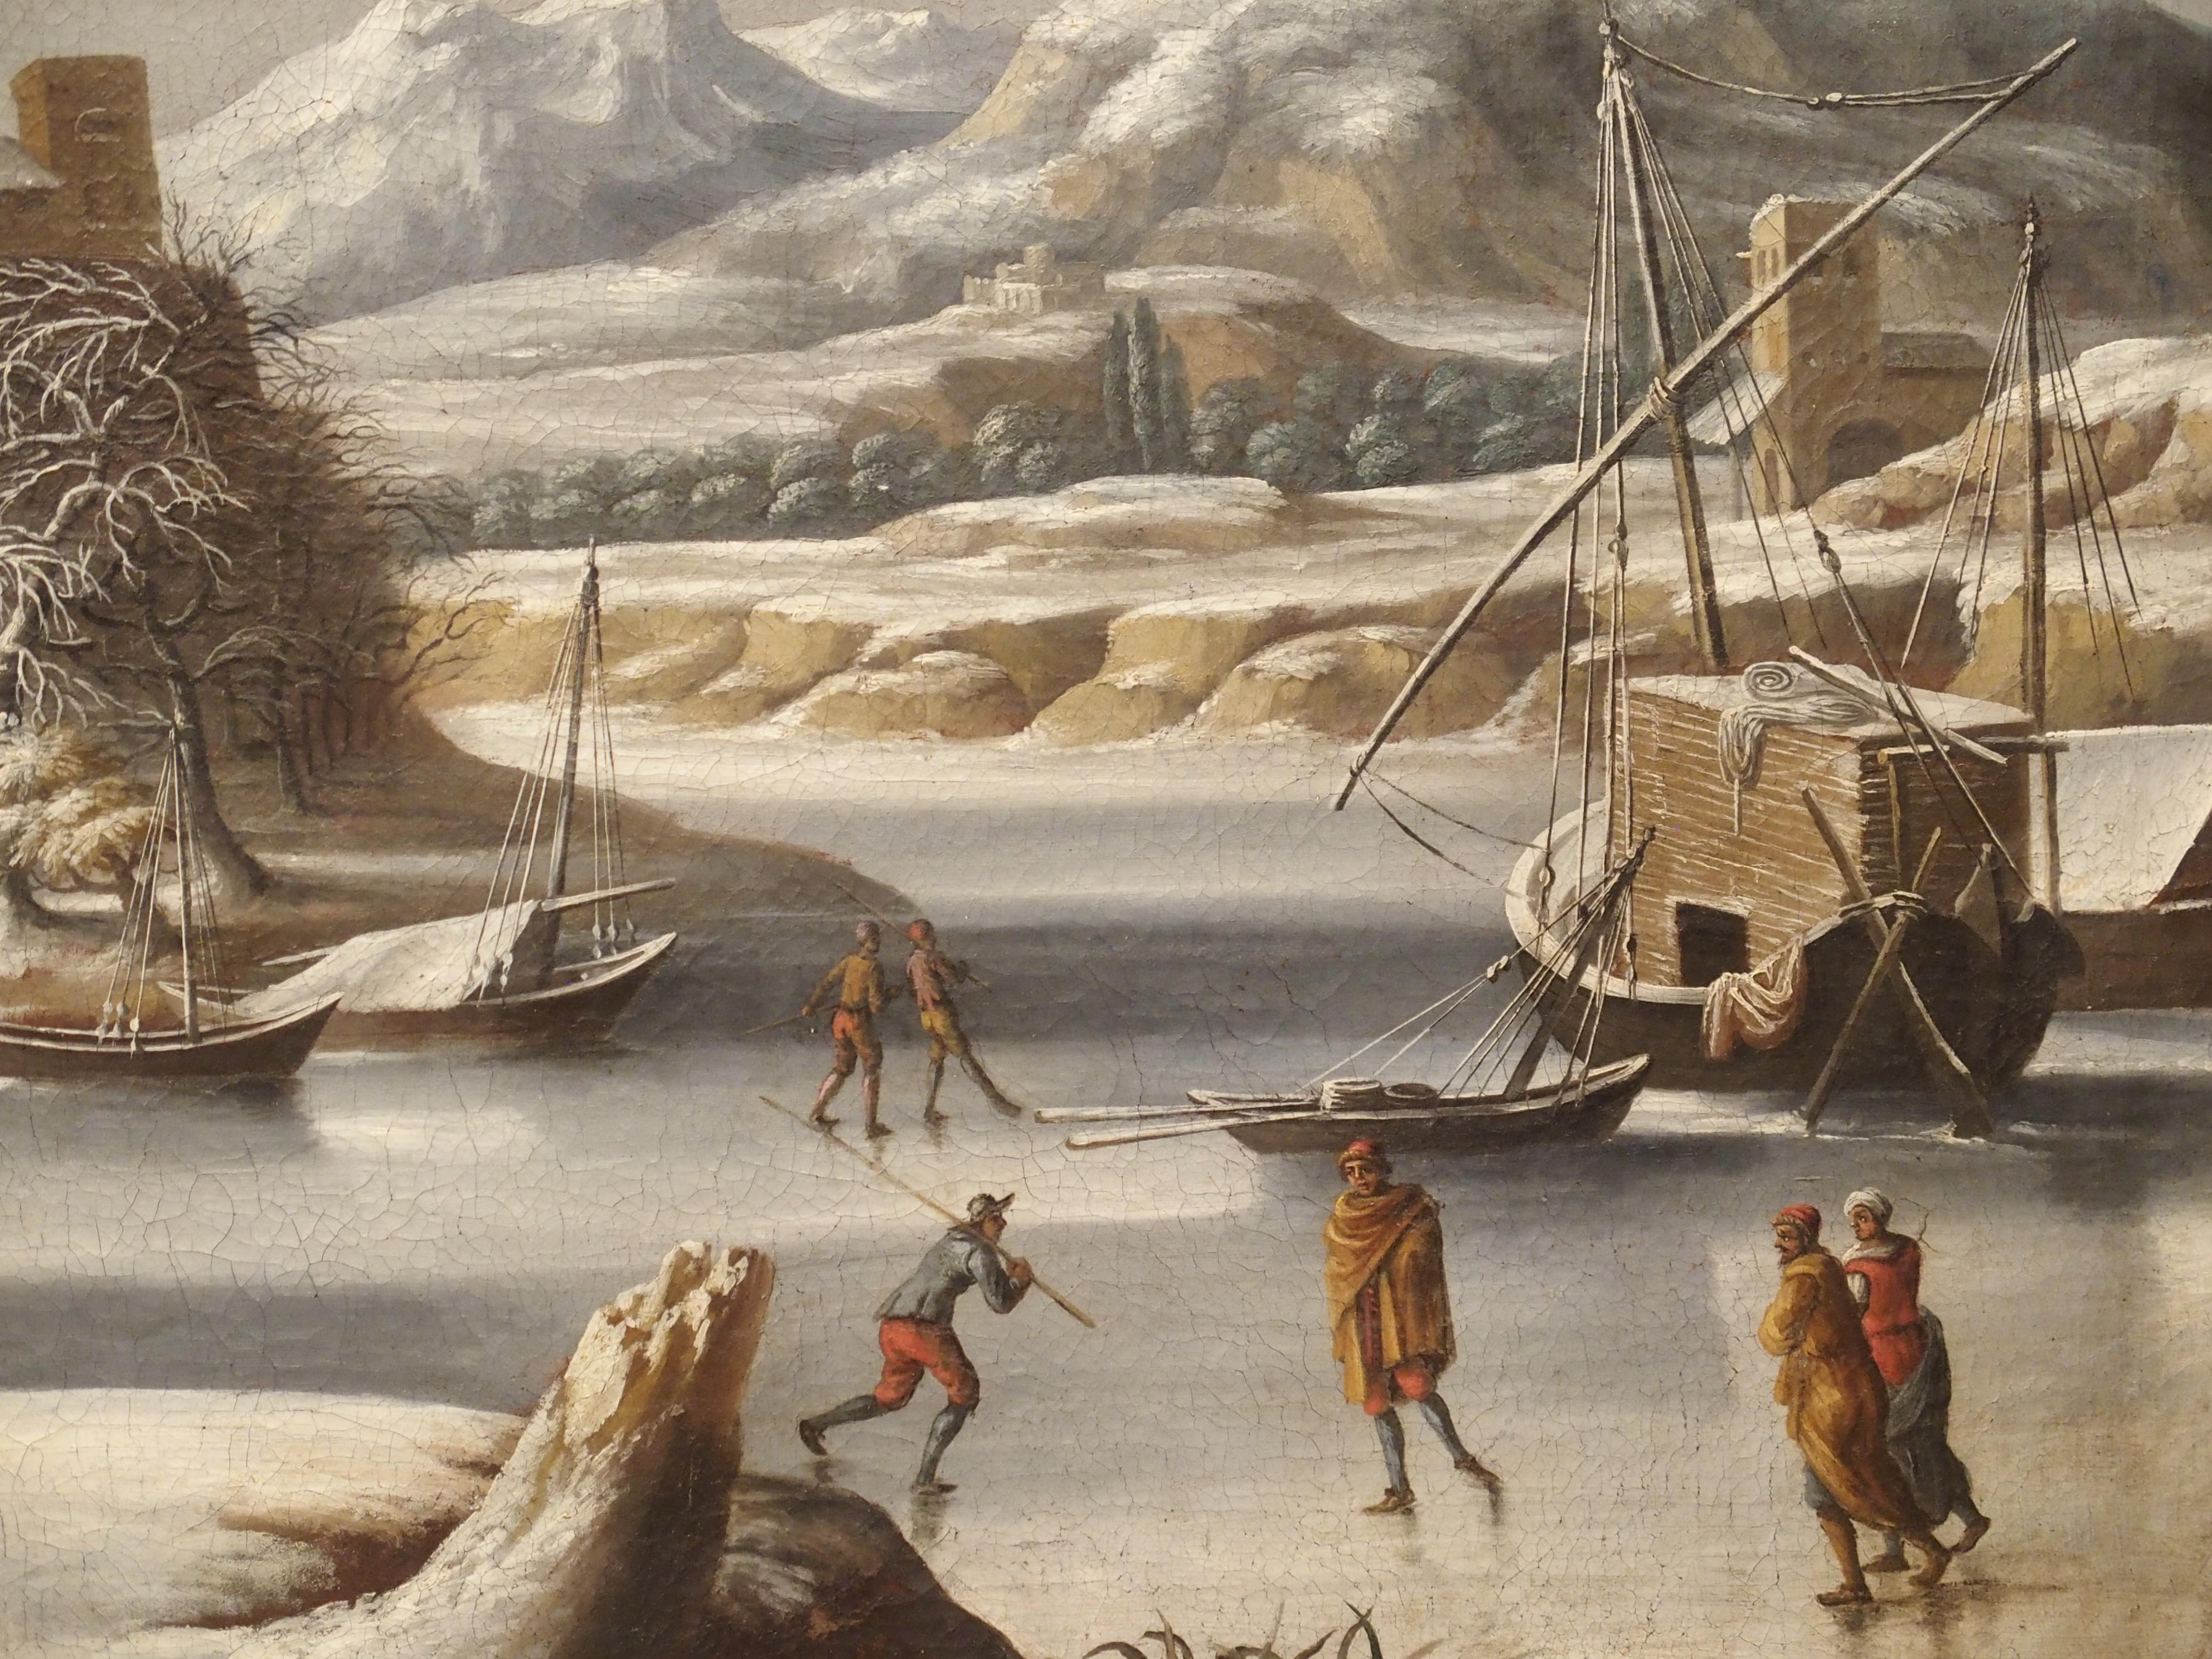 This large outdoor winter scene in a giltwood frame was painted in the Netherlands in the 1600’s. It was in the early to mid 1600s that Belgium and the Netherlands experienced what is known as “the little ice age”. Scientists can now confirm that